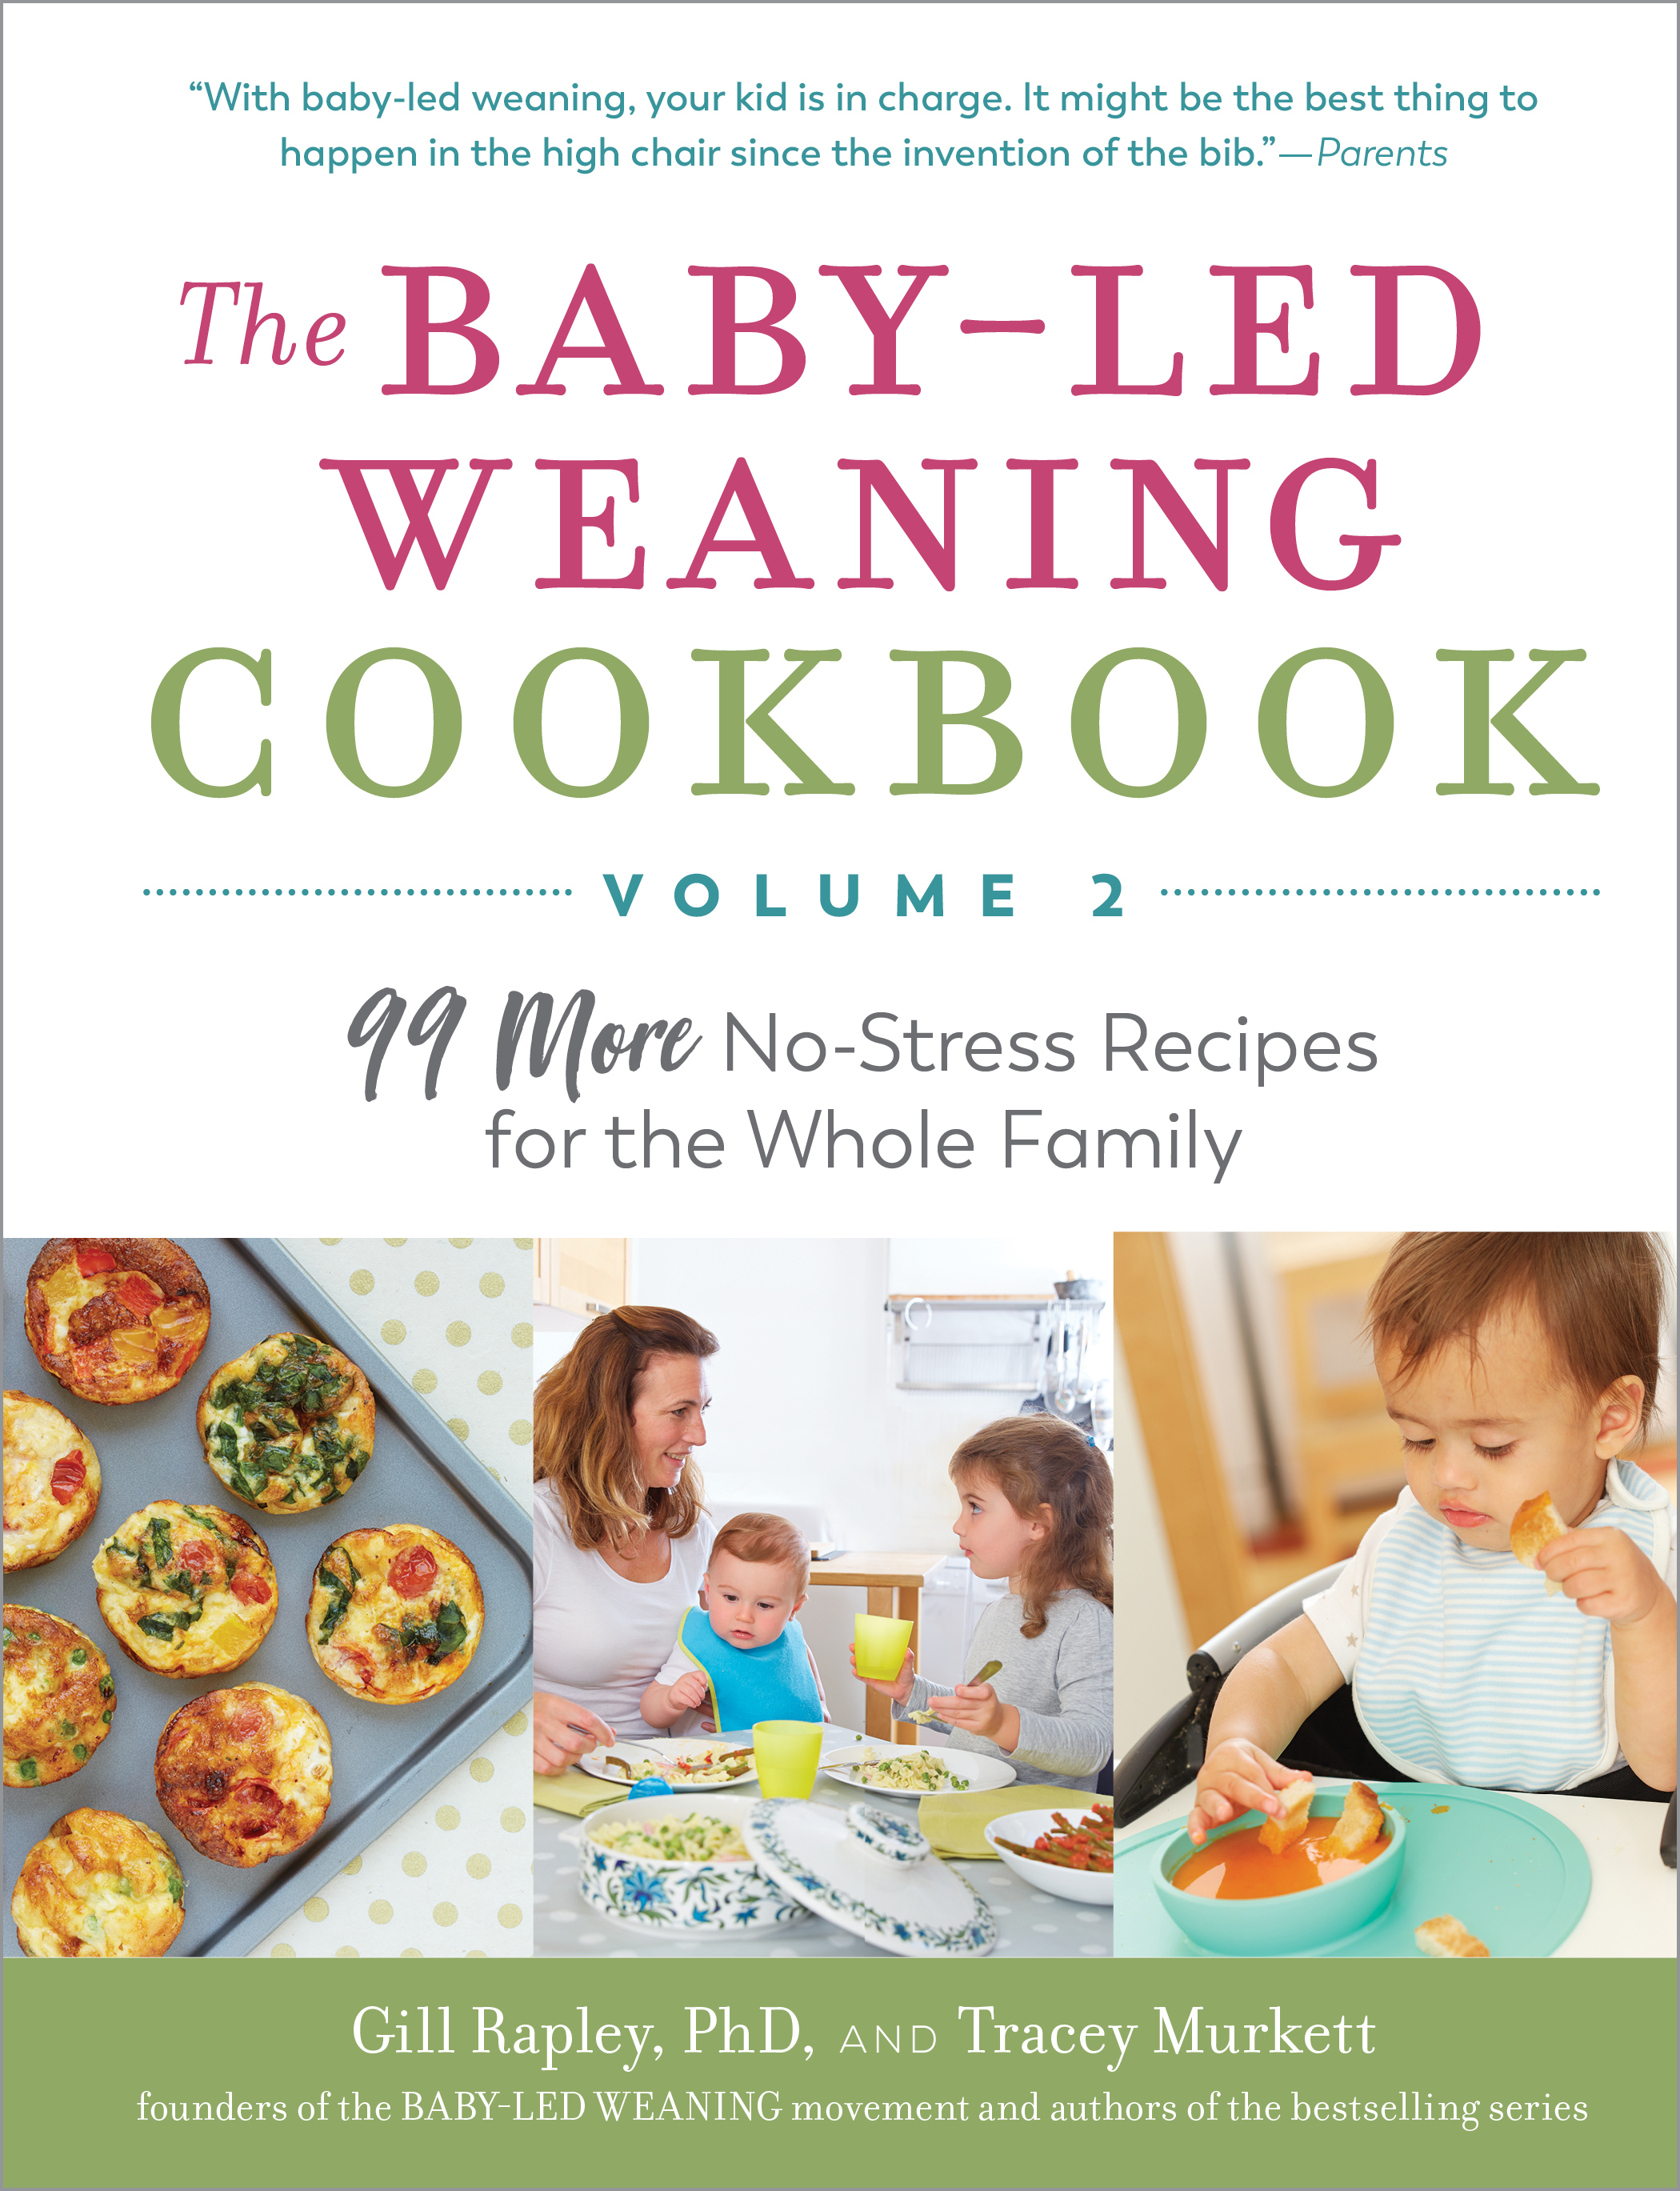  The Baby-Led Weaning Cookbook: Delicious Recipes That Will Help  Your Baby Learn to Eat Solid Foods―and That the Whole Family Will Enjoy  (The Authoritative Baby-Led Weaning Series): 9781615190492: Murkett,  Tracey, Rapley